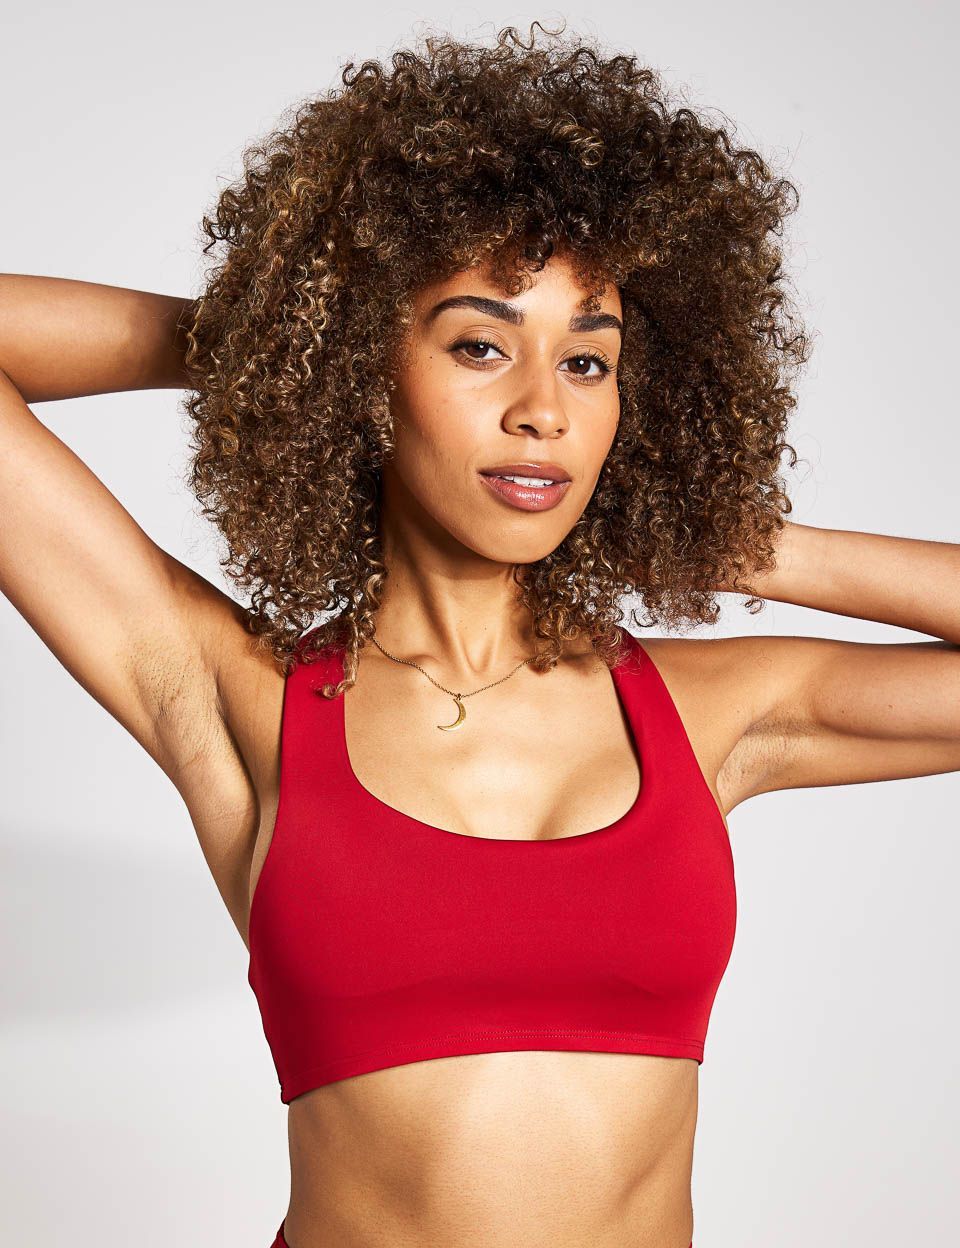 a woman with curly hair is wearing a red sports bra .